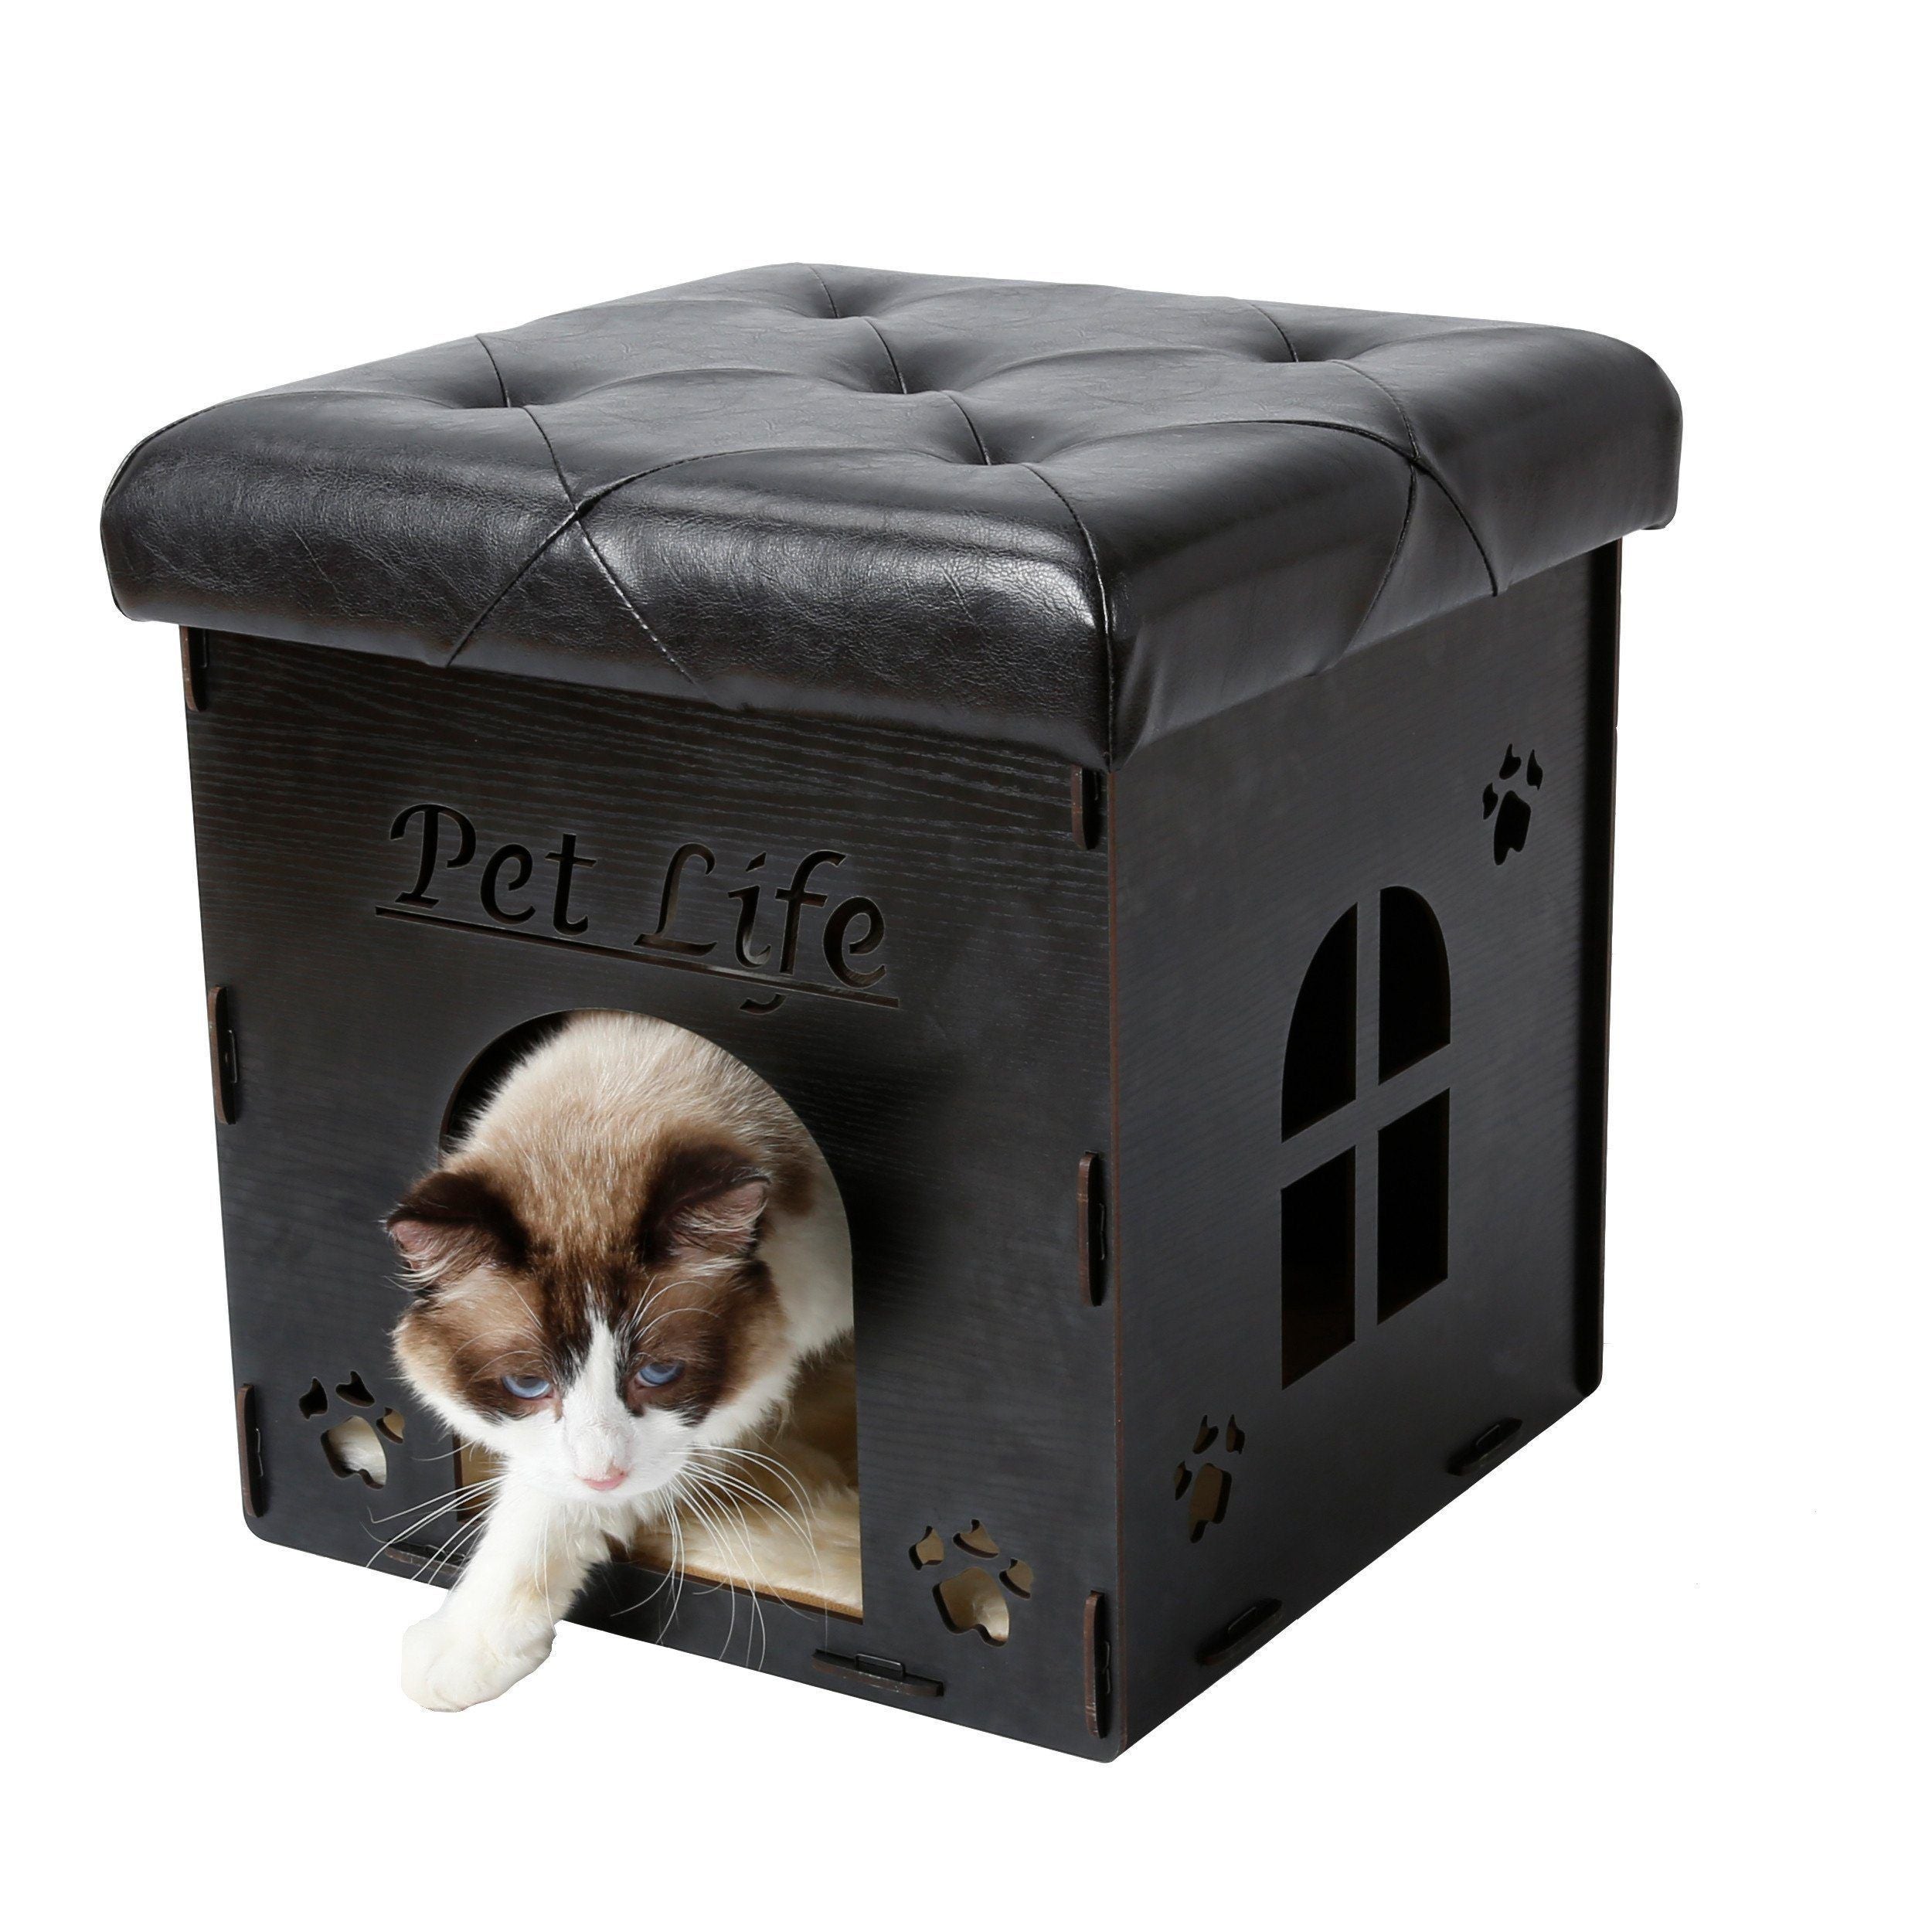 Pet Life ® 'Kitty Kallapse' Collapsible Folding Kitty Cat House Tree Bed Ottoman Bench Furniture Black 